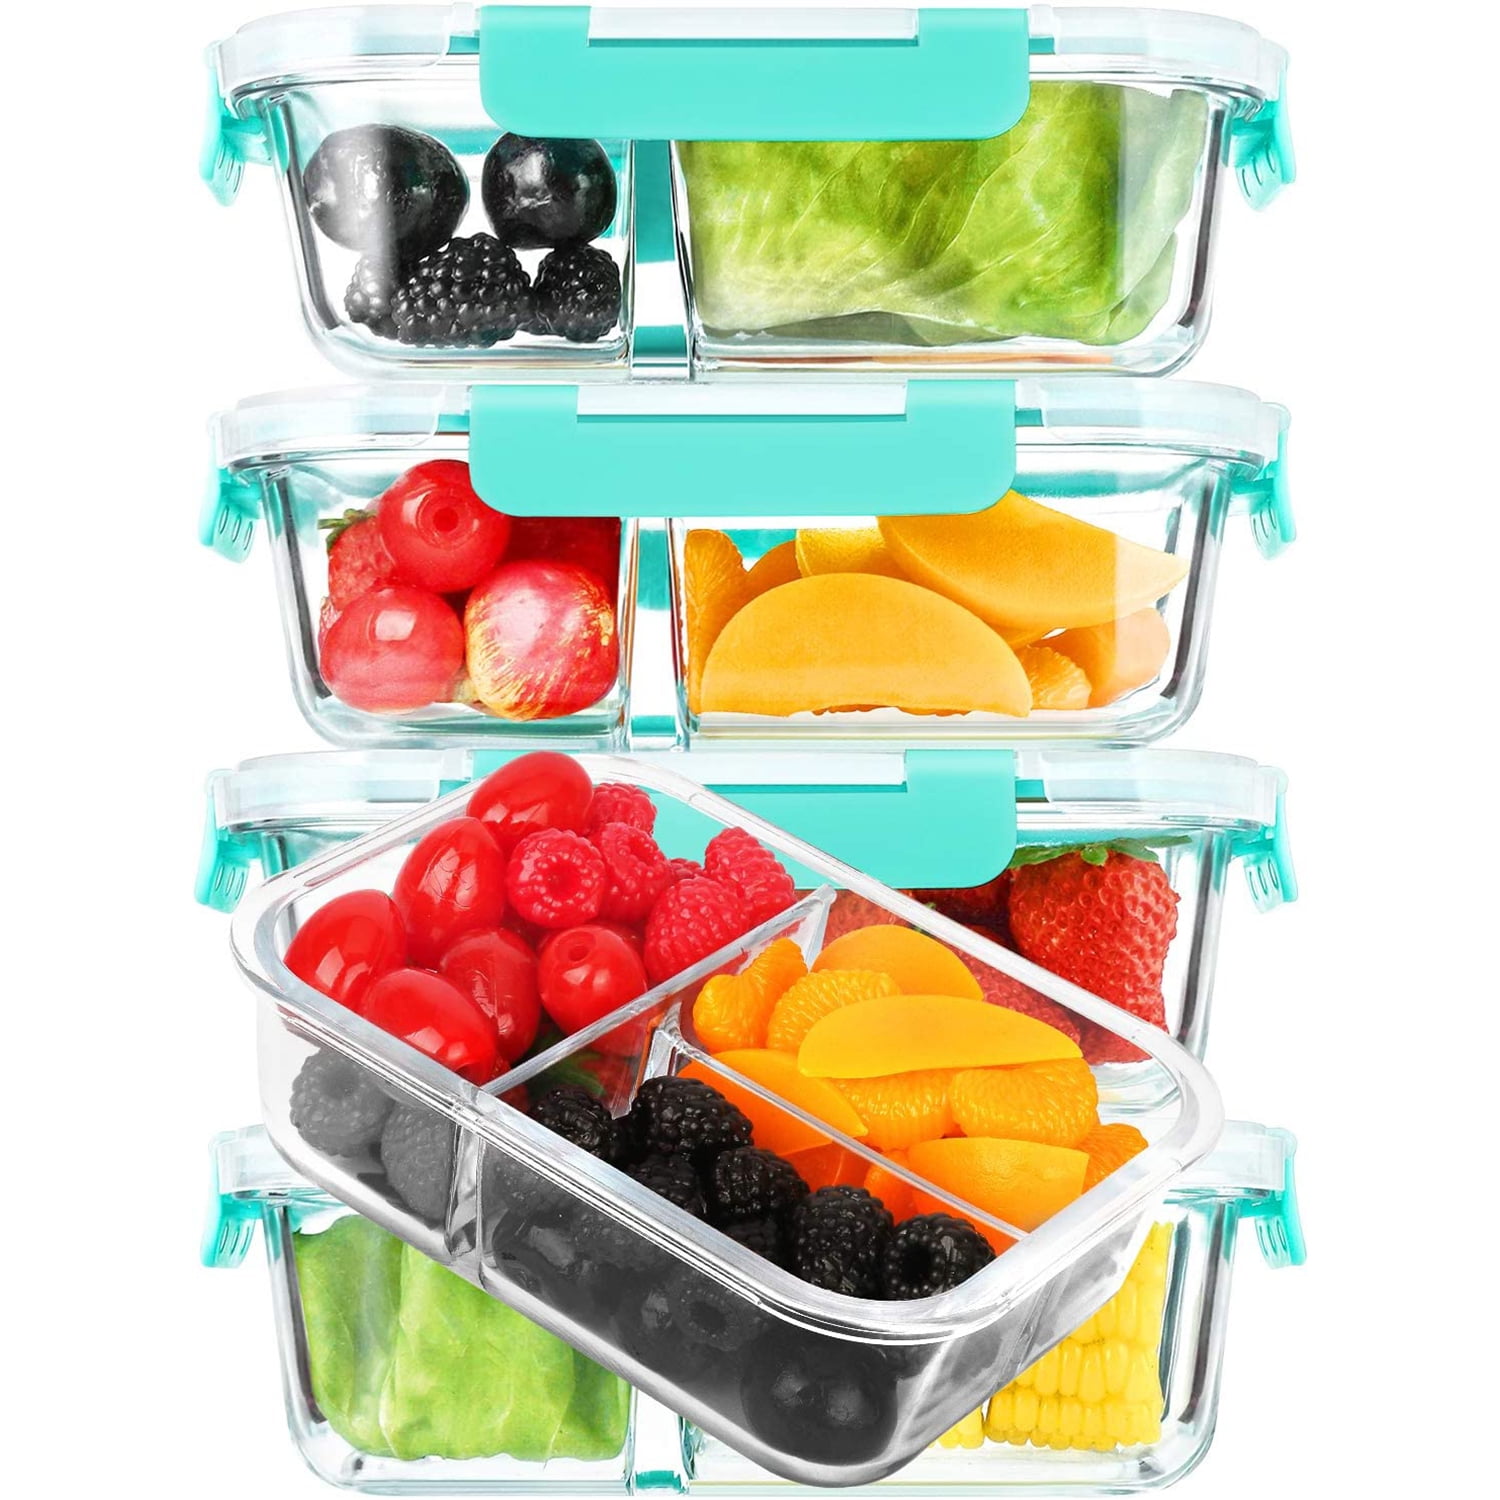 M MCIRCO 36 OZ Glass Meal Prep Containers, Three Compartment, 5